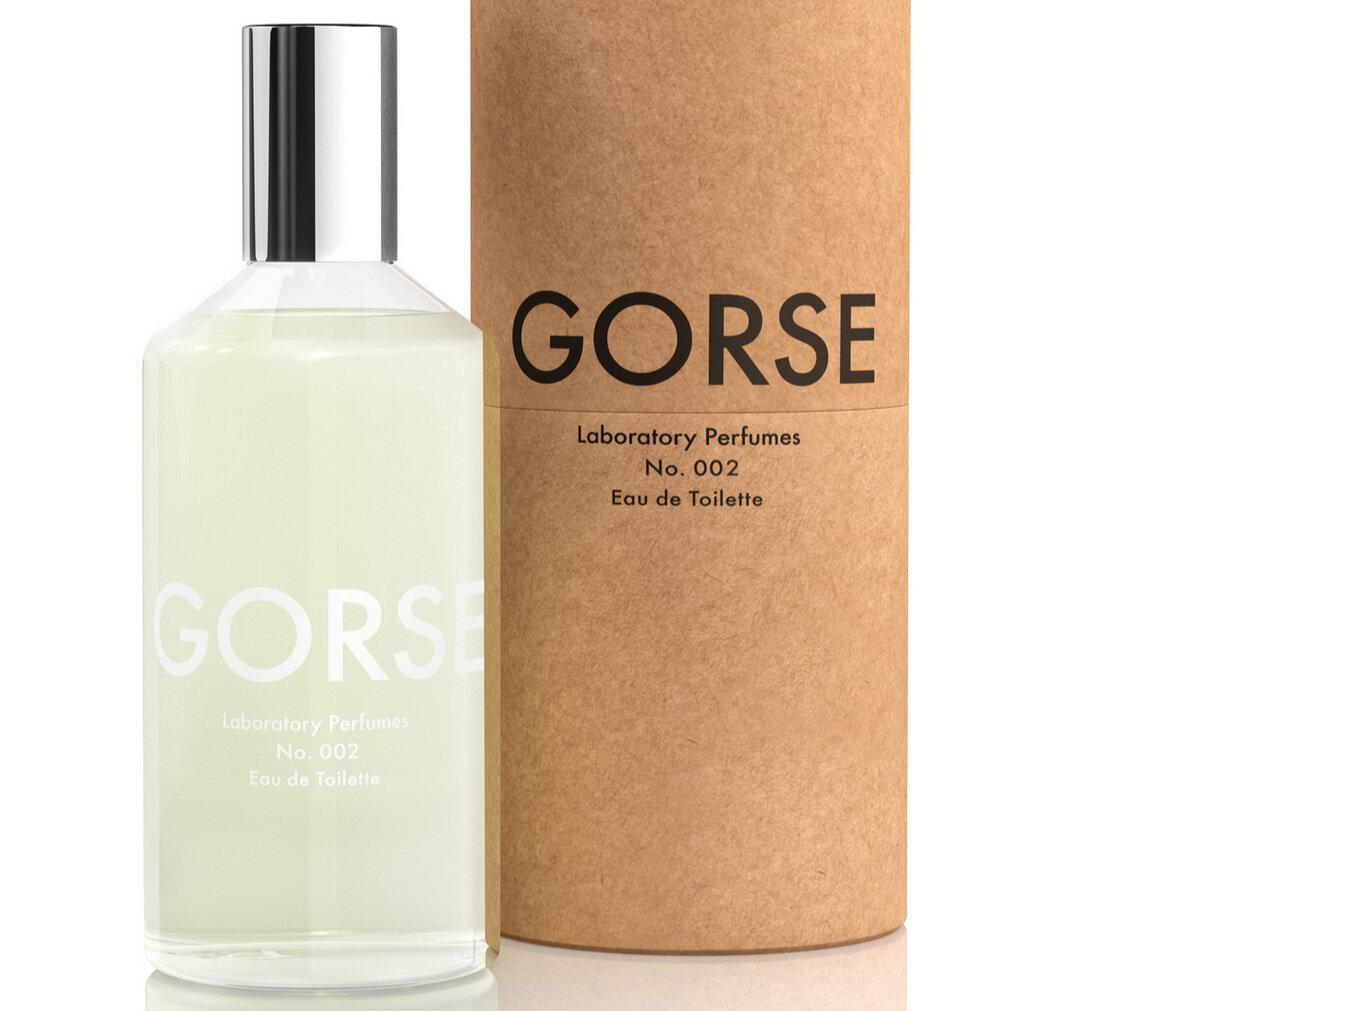 A fine UK perfumerie with top eco cred. From £70